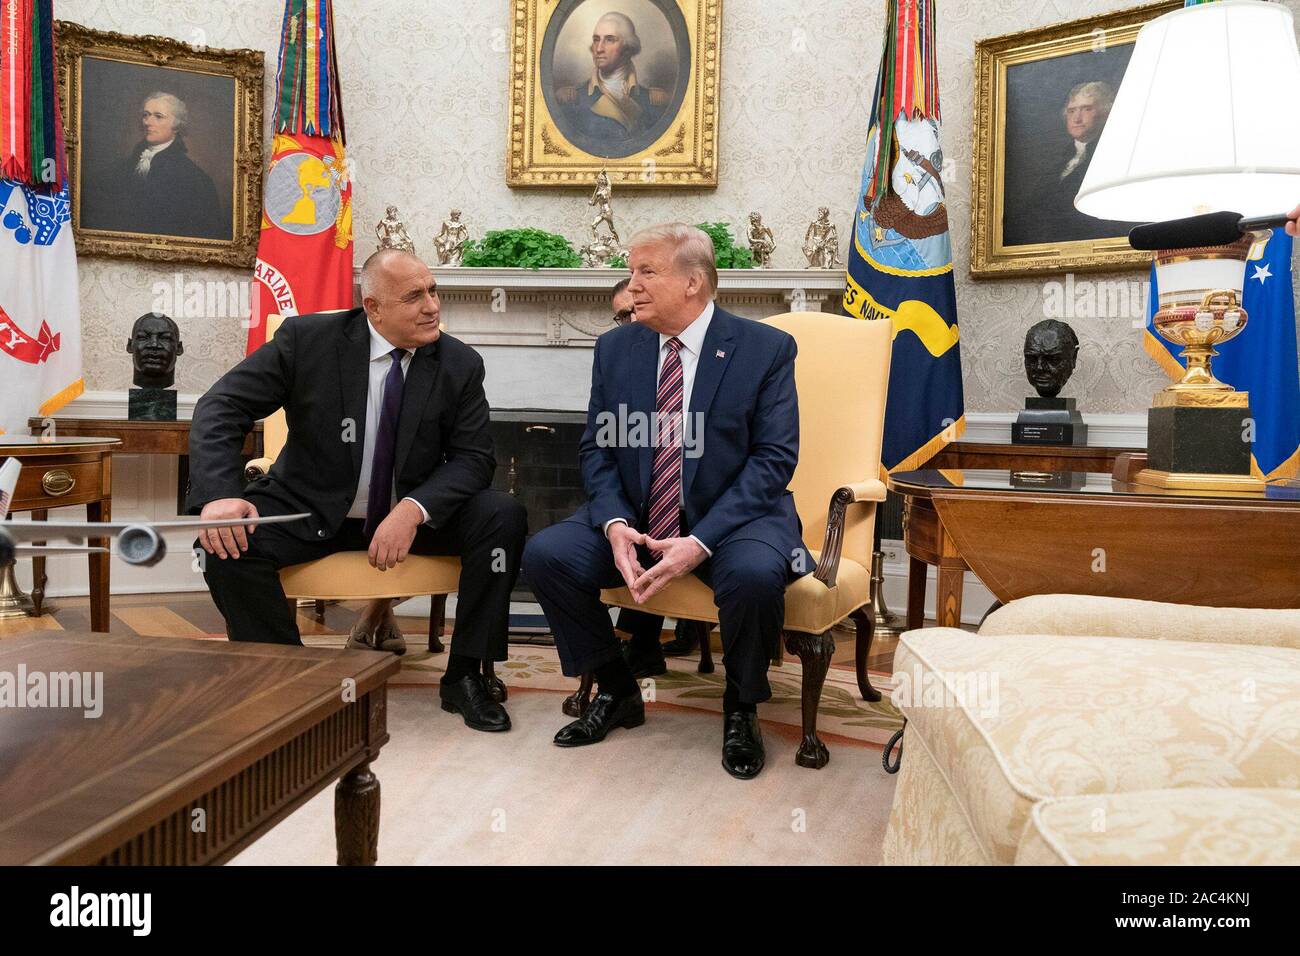 President Donald J. Trump meets with Bulgarian Prime Minister Boyko Borissov Monday, Nov. 25, 2019, in the Oval Office of the White House. Stock Photo